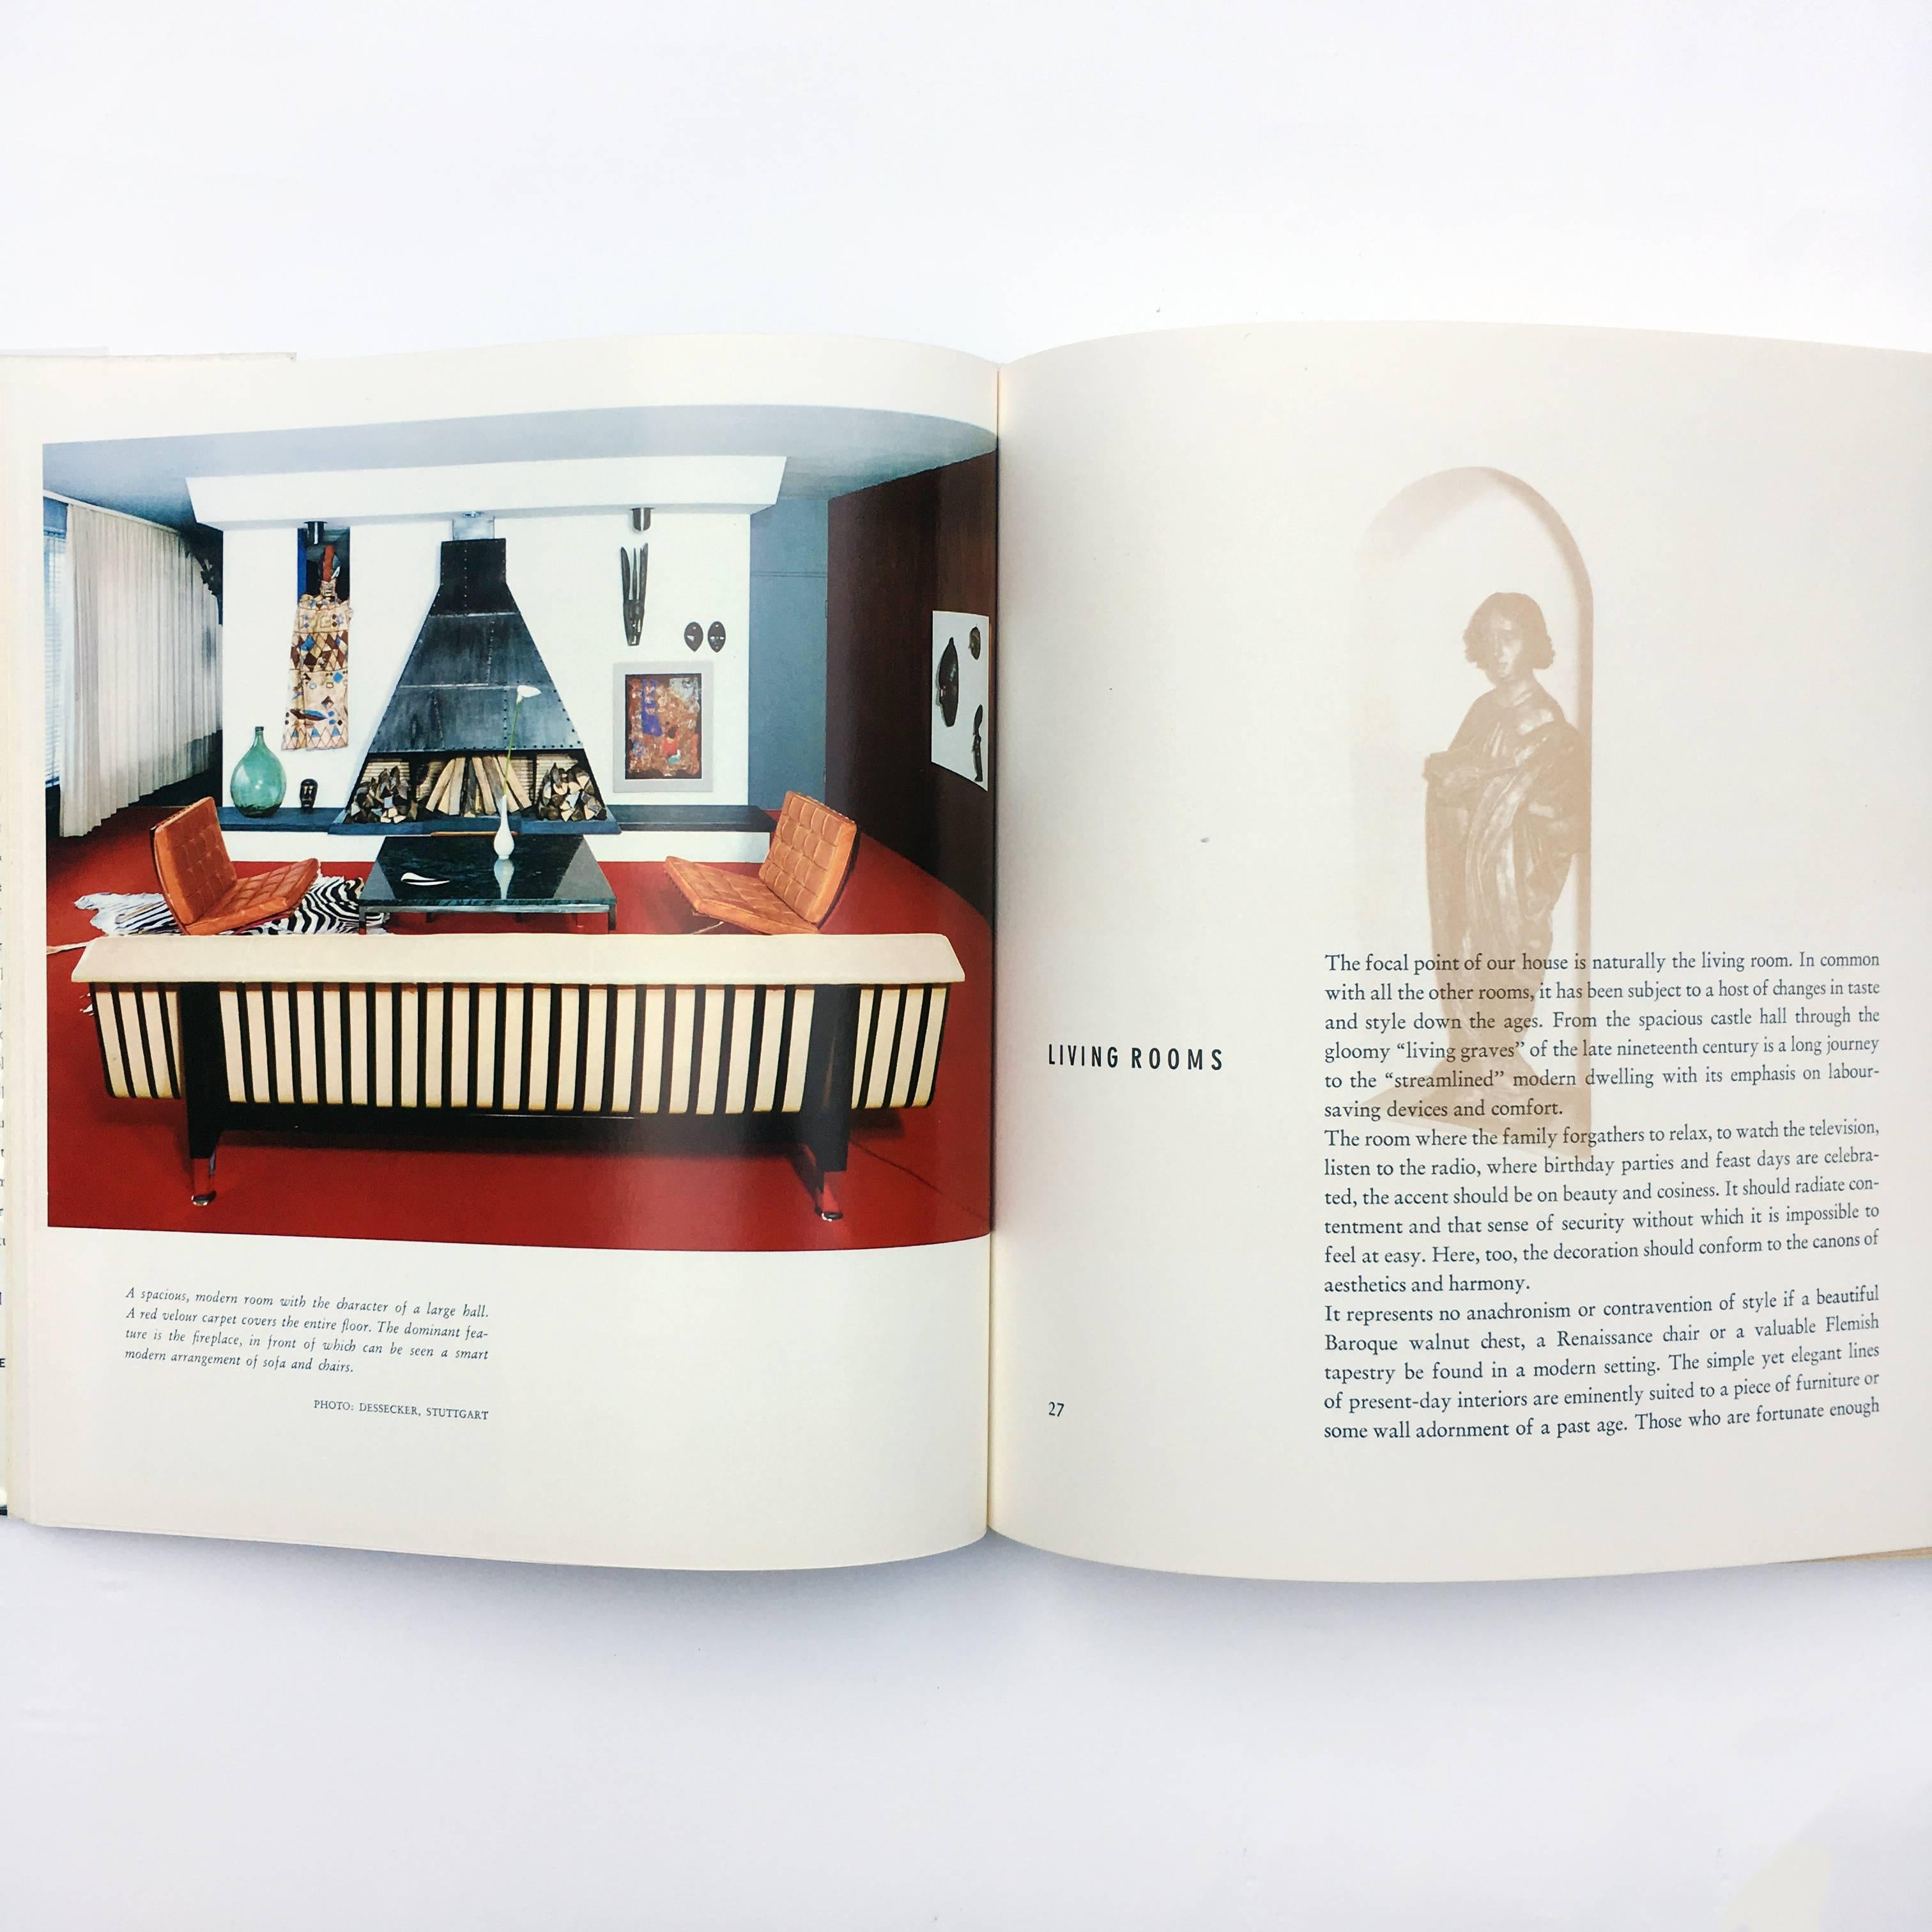 American Interiors for Contemporary Living 1st Edition, 1960